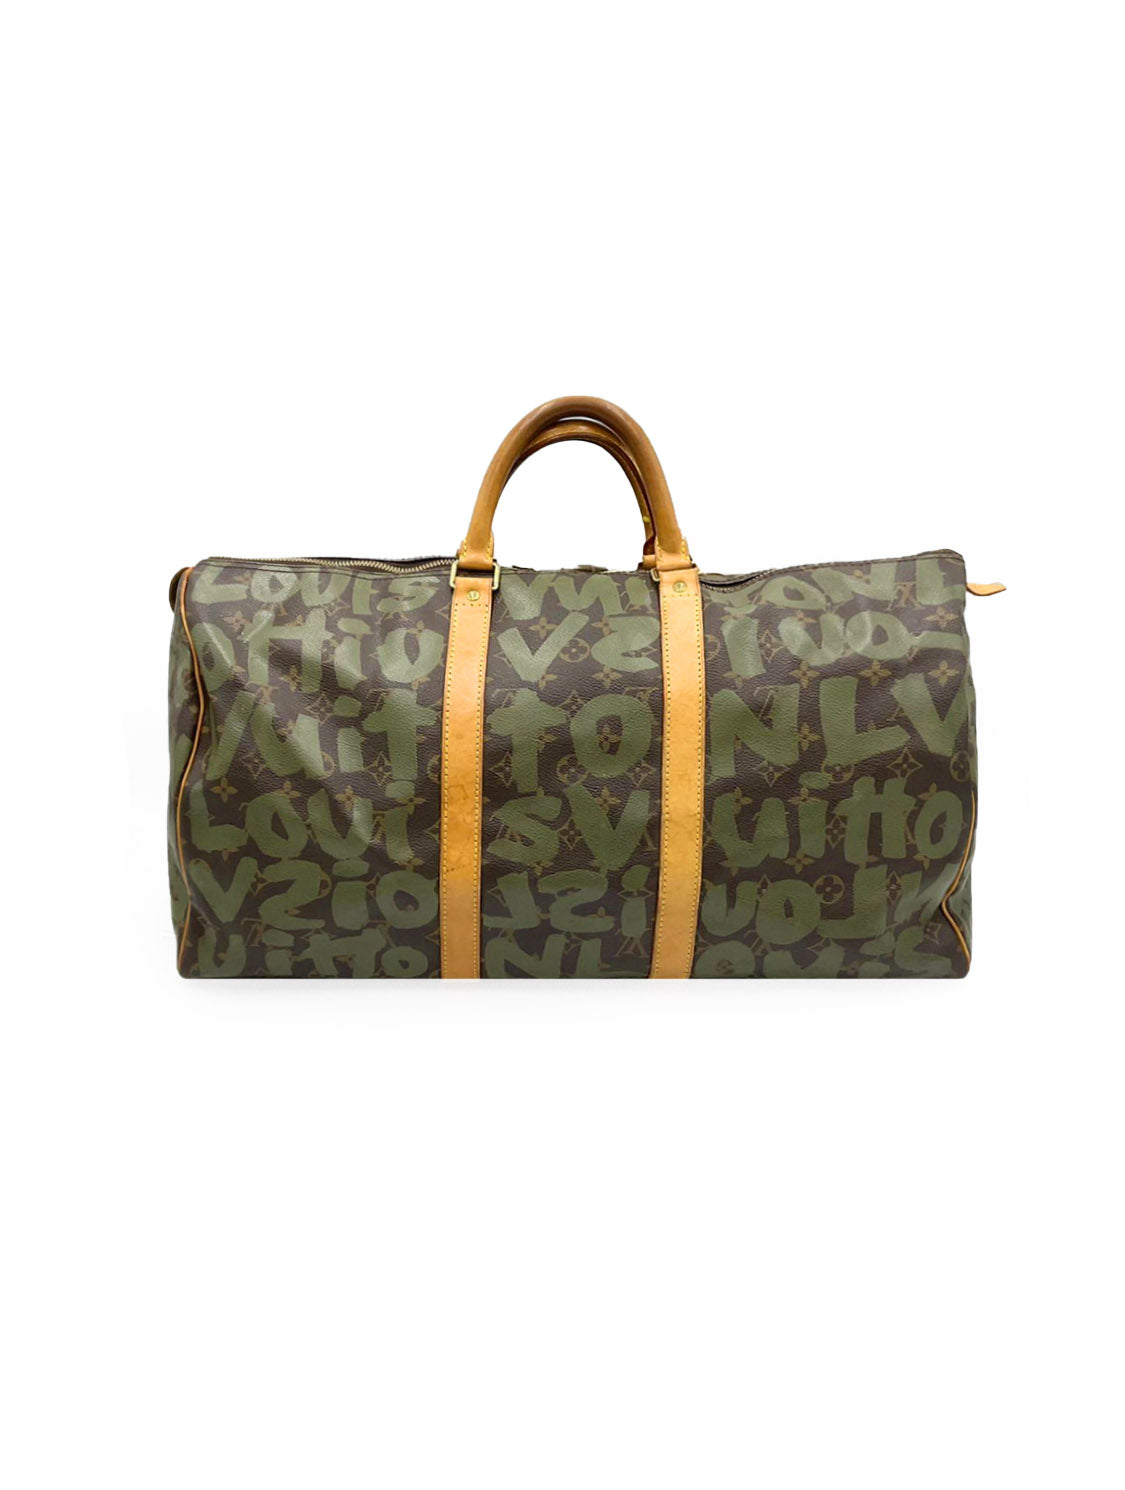 Rare, Louis Vuitton Weekender Bag with Iconic LV Monogram and